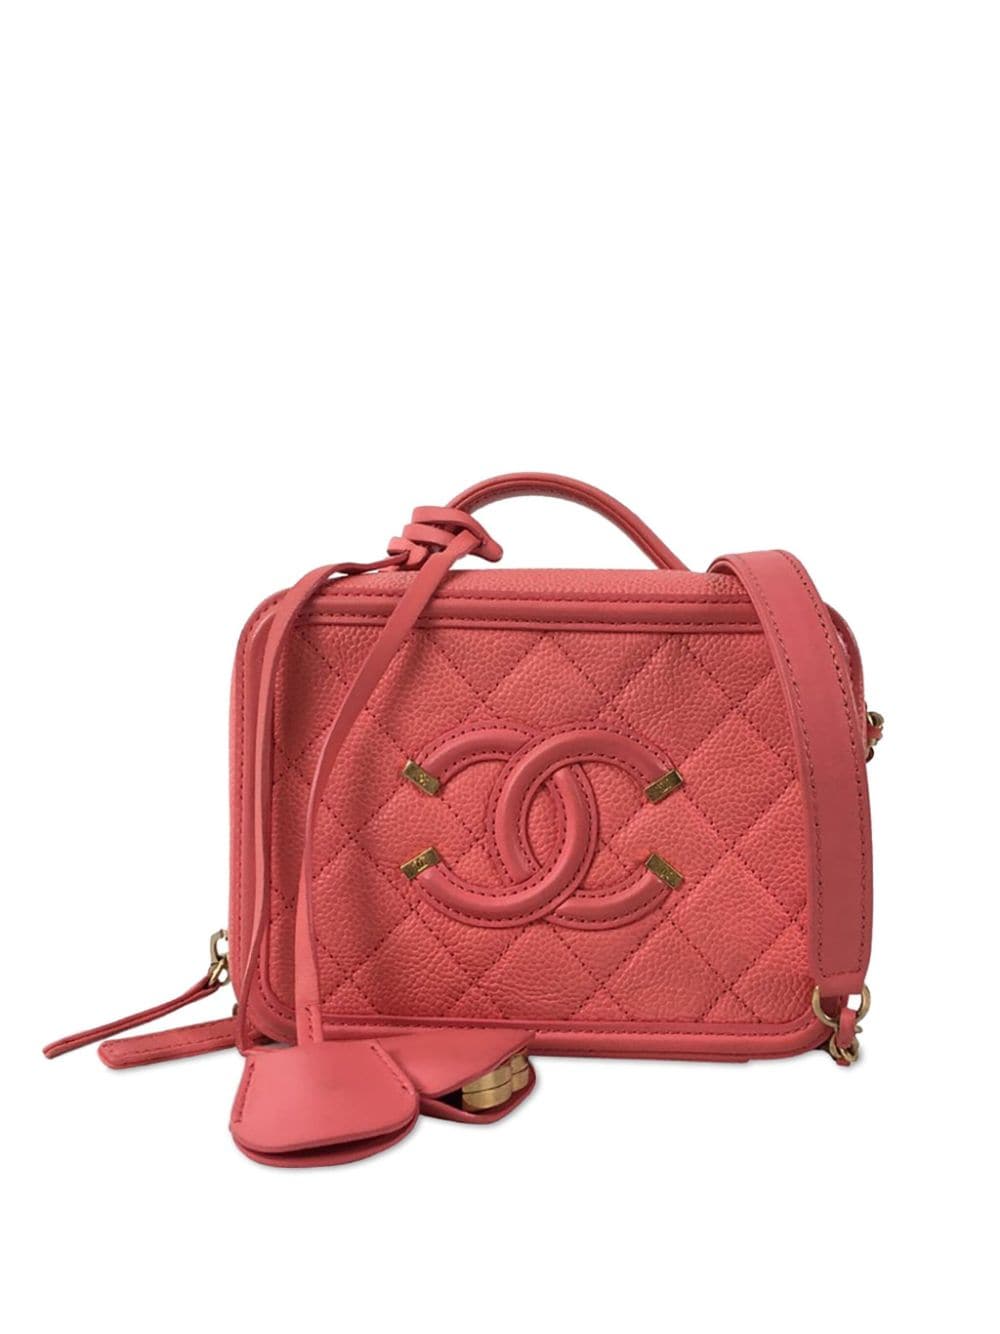 CHANEL Pre-Owned 2017-2018 Small Caviar CC Filigree Vanity Bag satchel - Rosa von CHANEL Pre-Owned